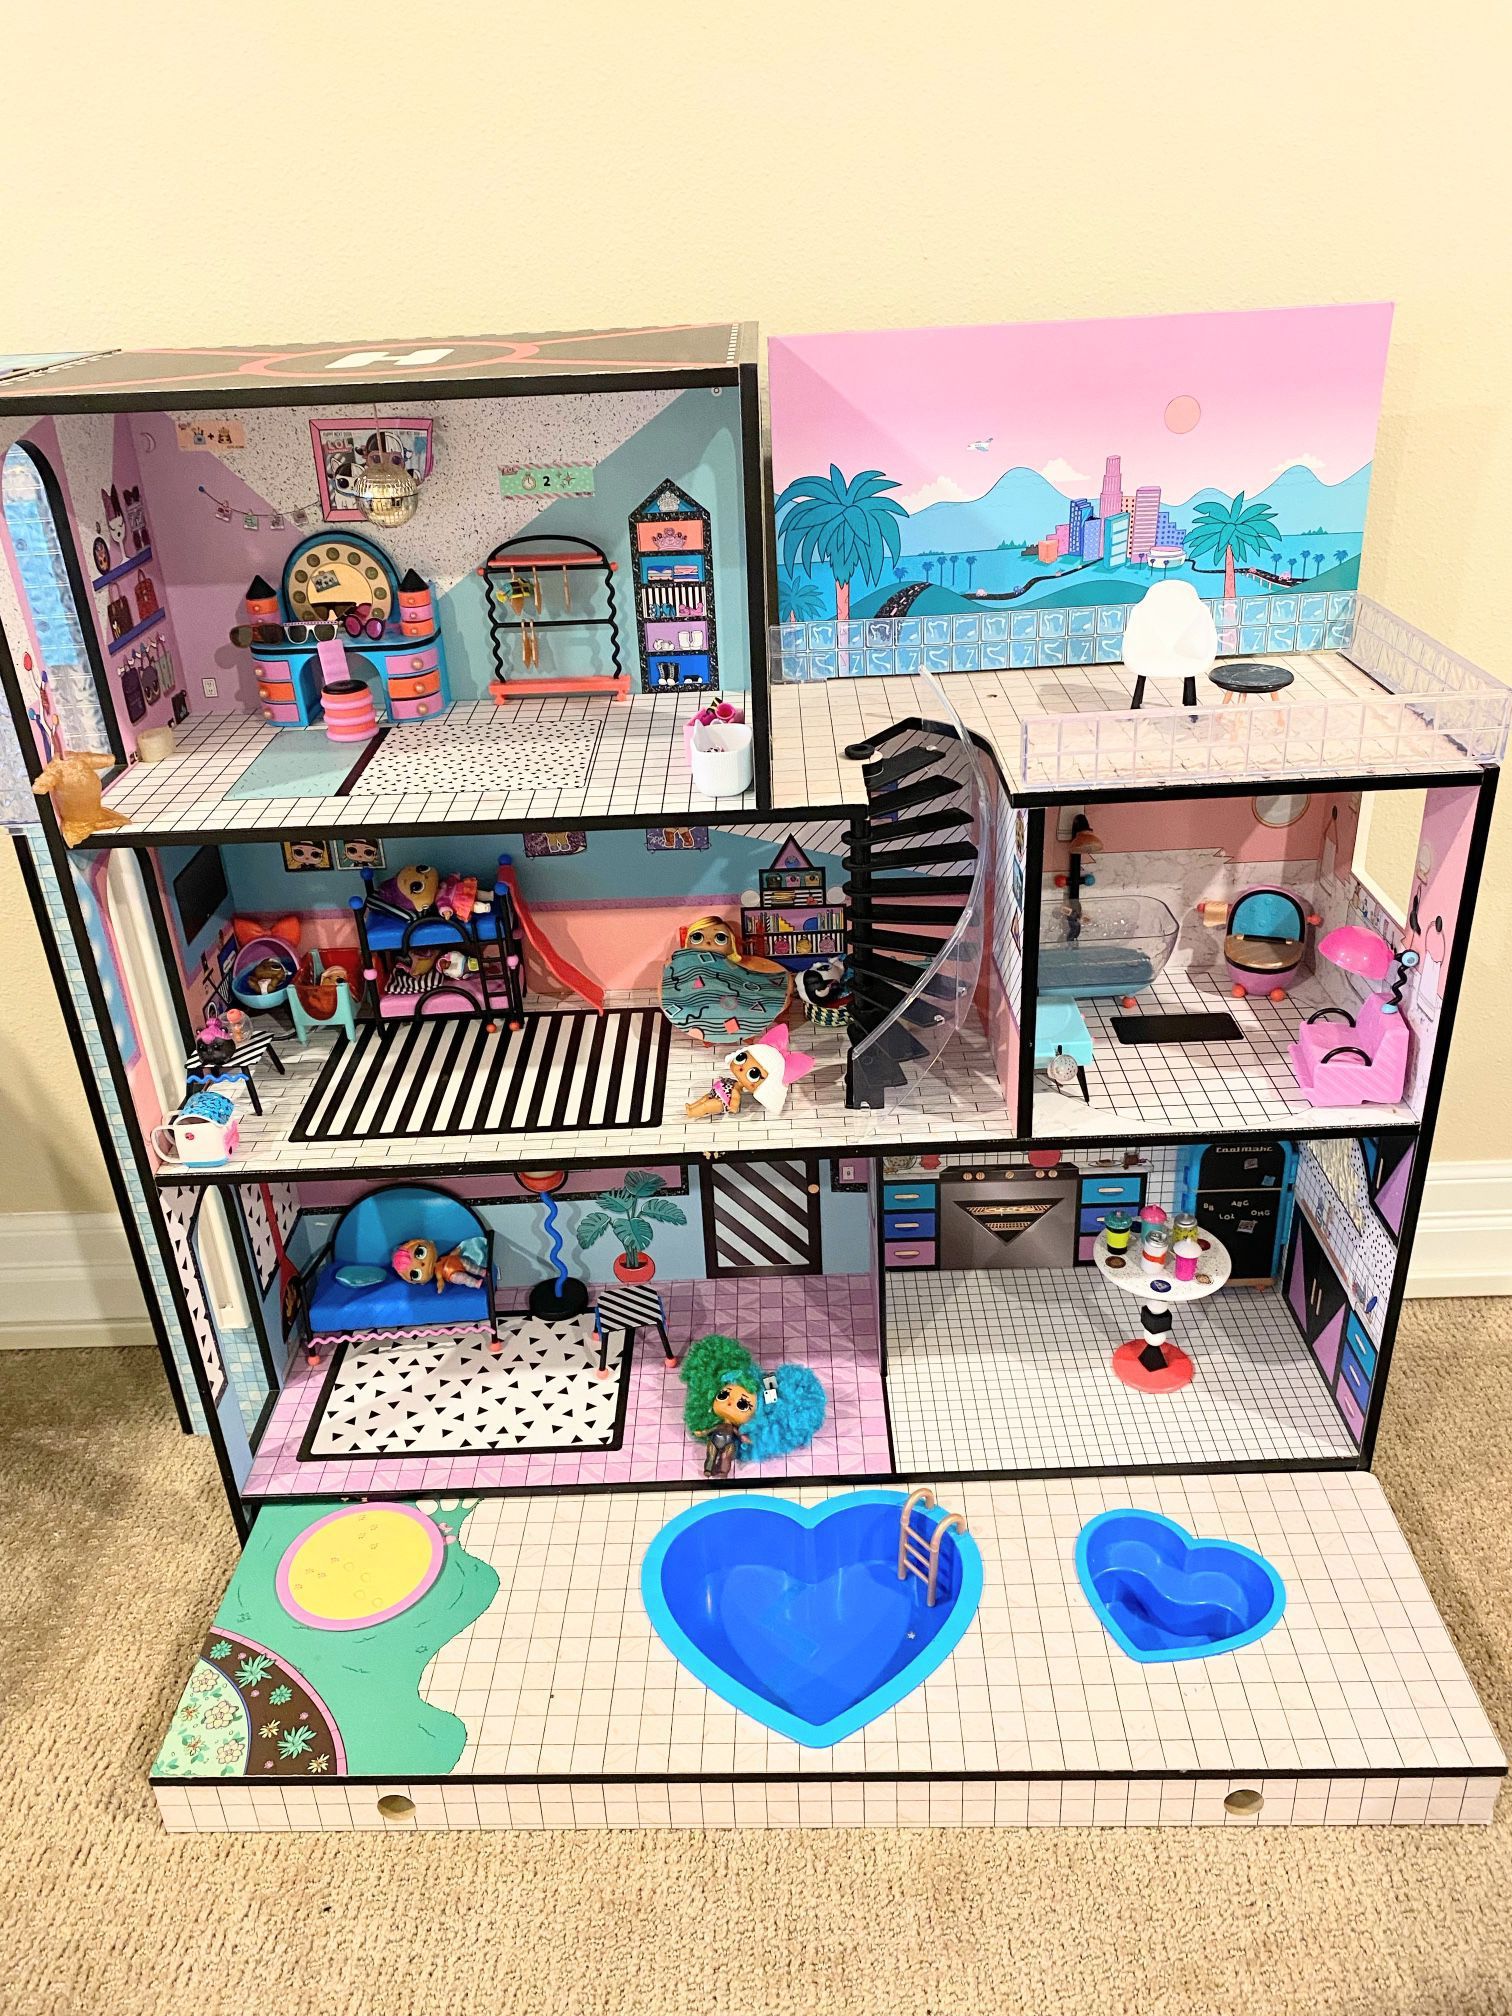 LOL Surprise Doll House with All Dolls & Accessories On Picture